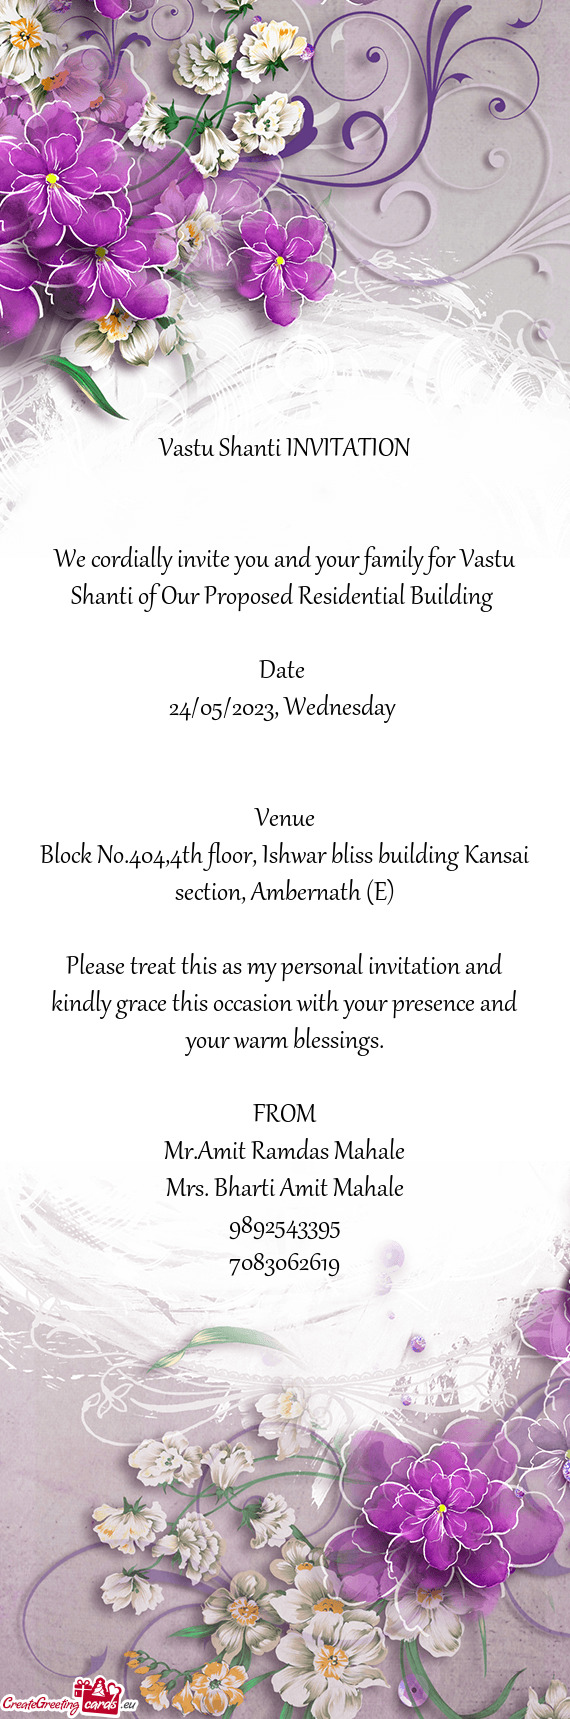 We cordially invite you and your family for Vastu Shanti of Our Proposed Residential Building